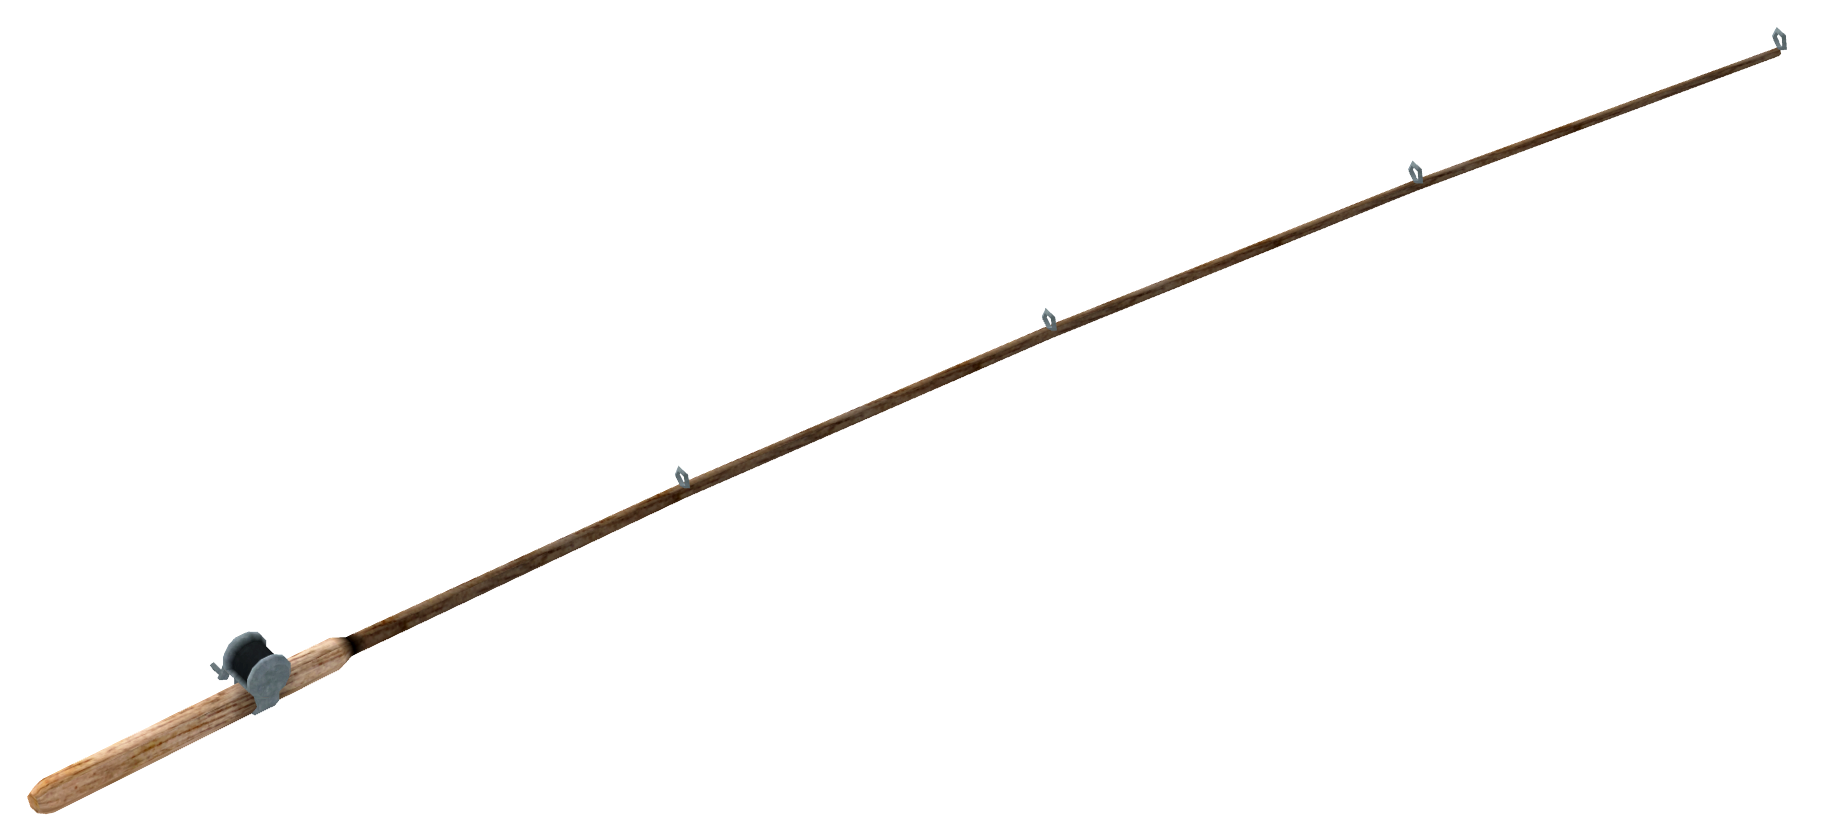 Fishing rod PNG image transparent image download, size: 1830x831px